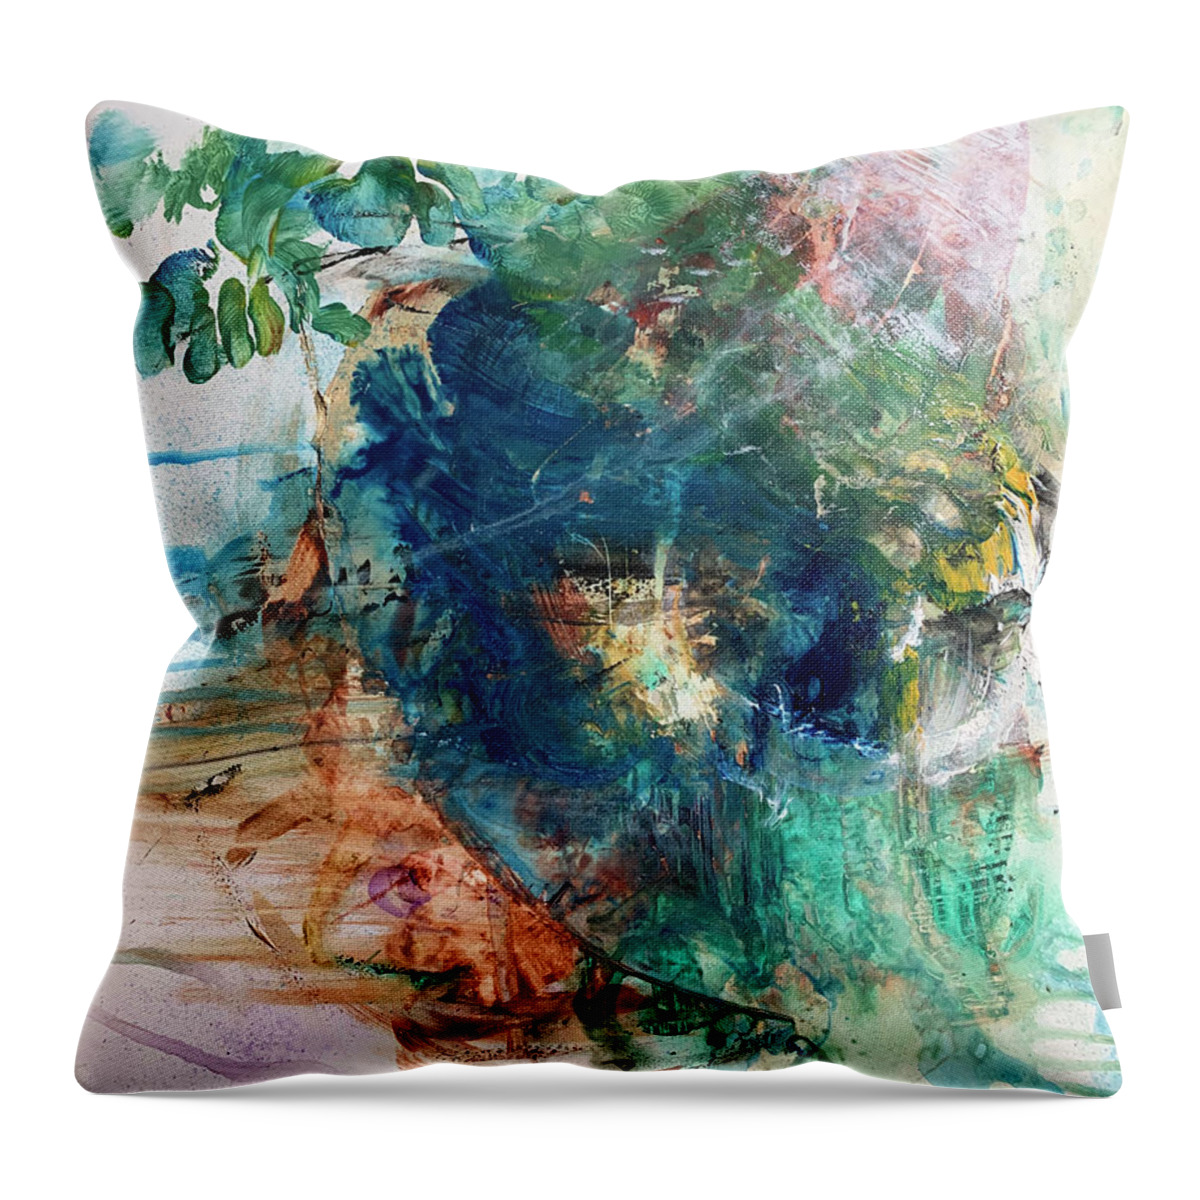 Abstract Art Throw Pillow featuring the painting Pleasantries Aside by Rodney Frederickson